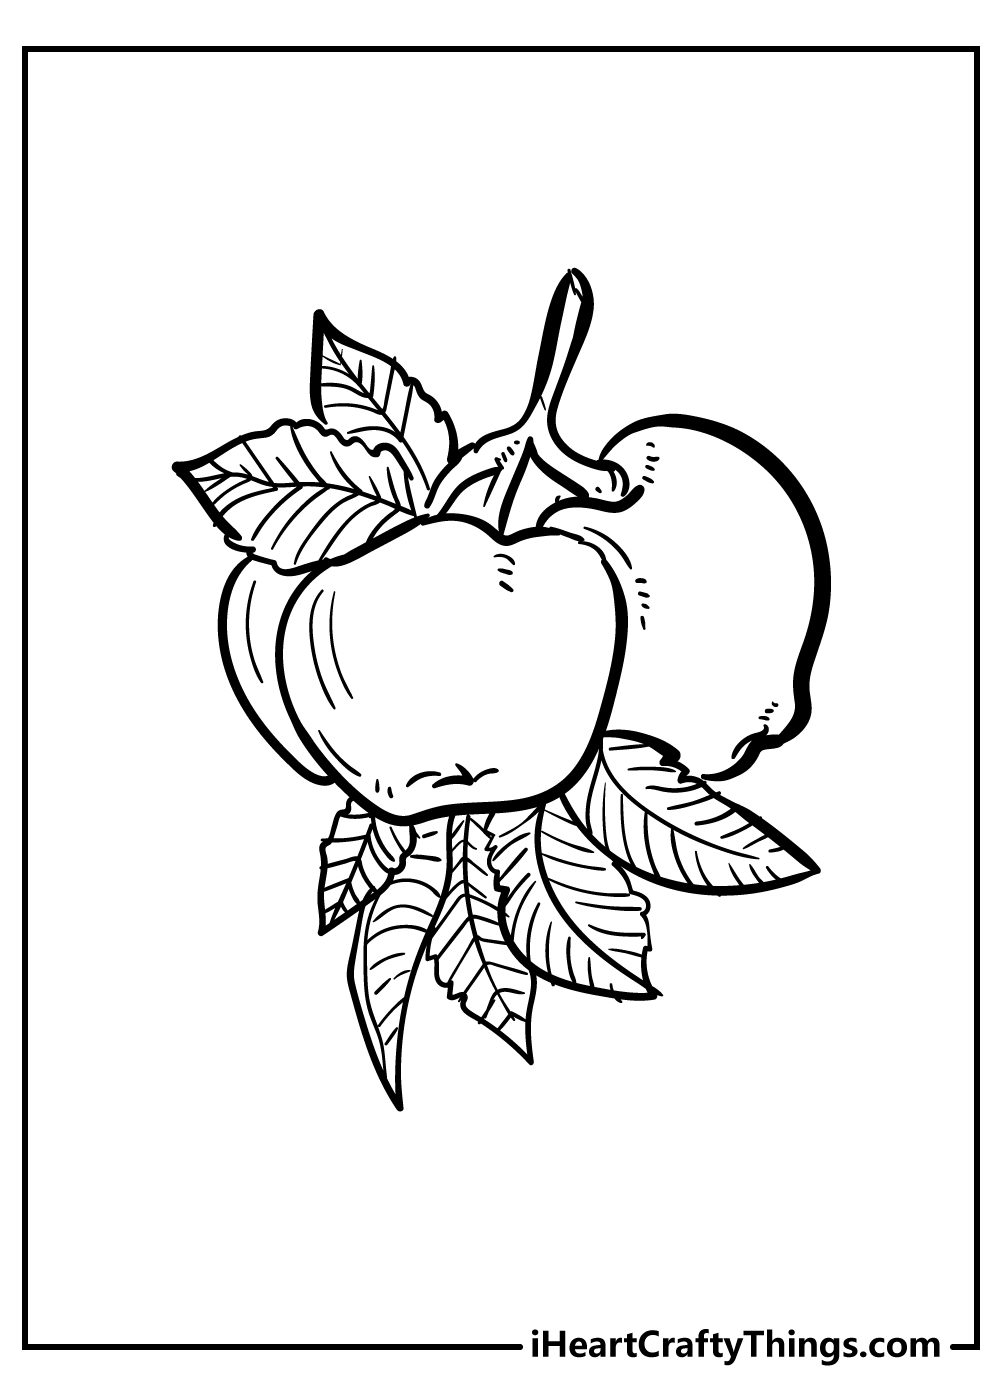 Apple Coloring Pages for adults free printable